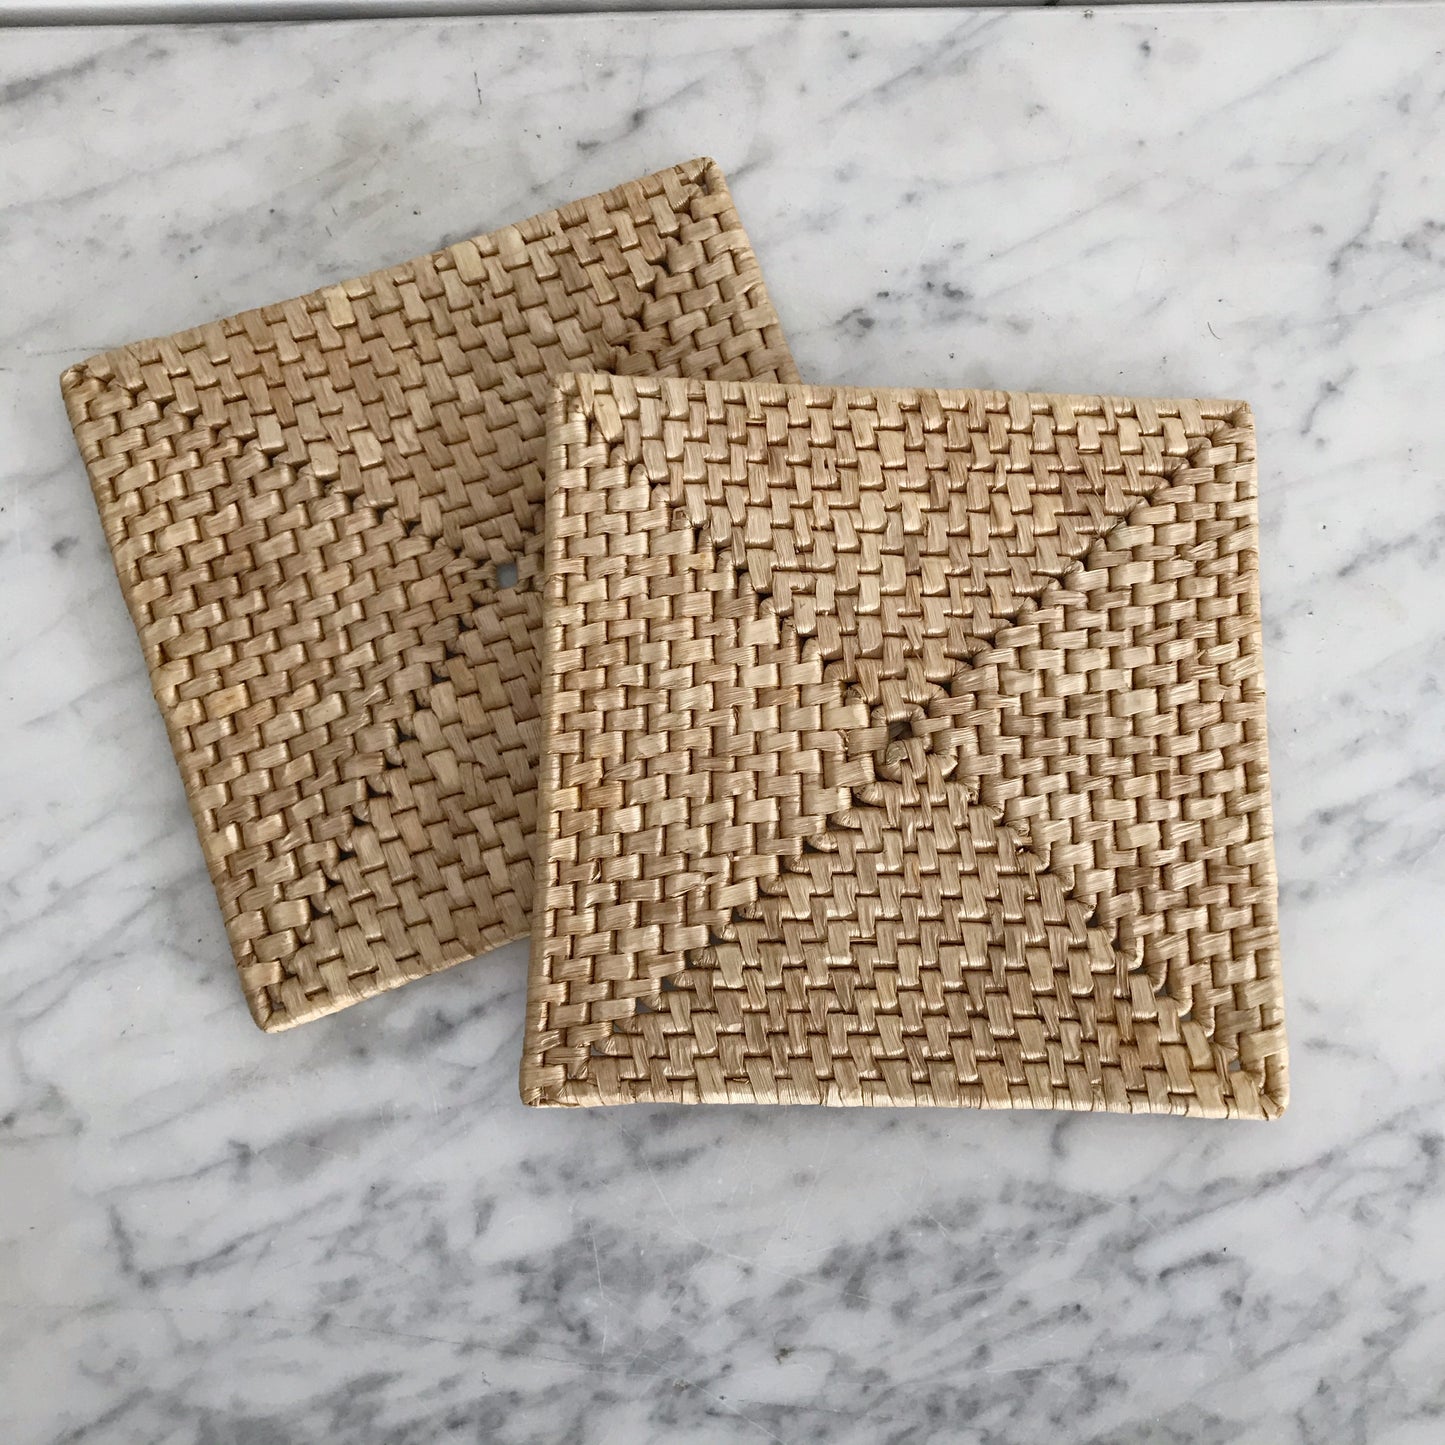 Pair of Woven Straw Square Trivets